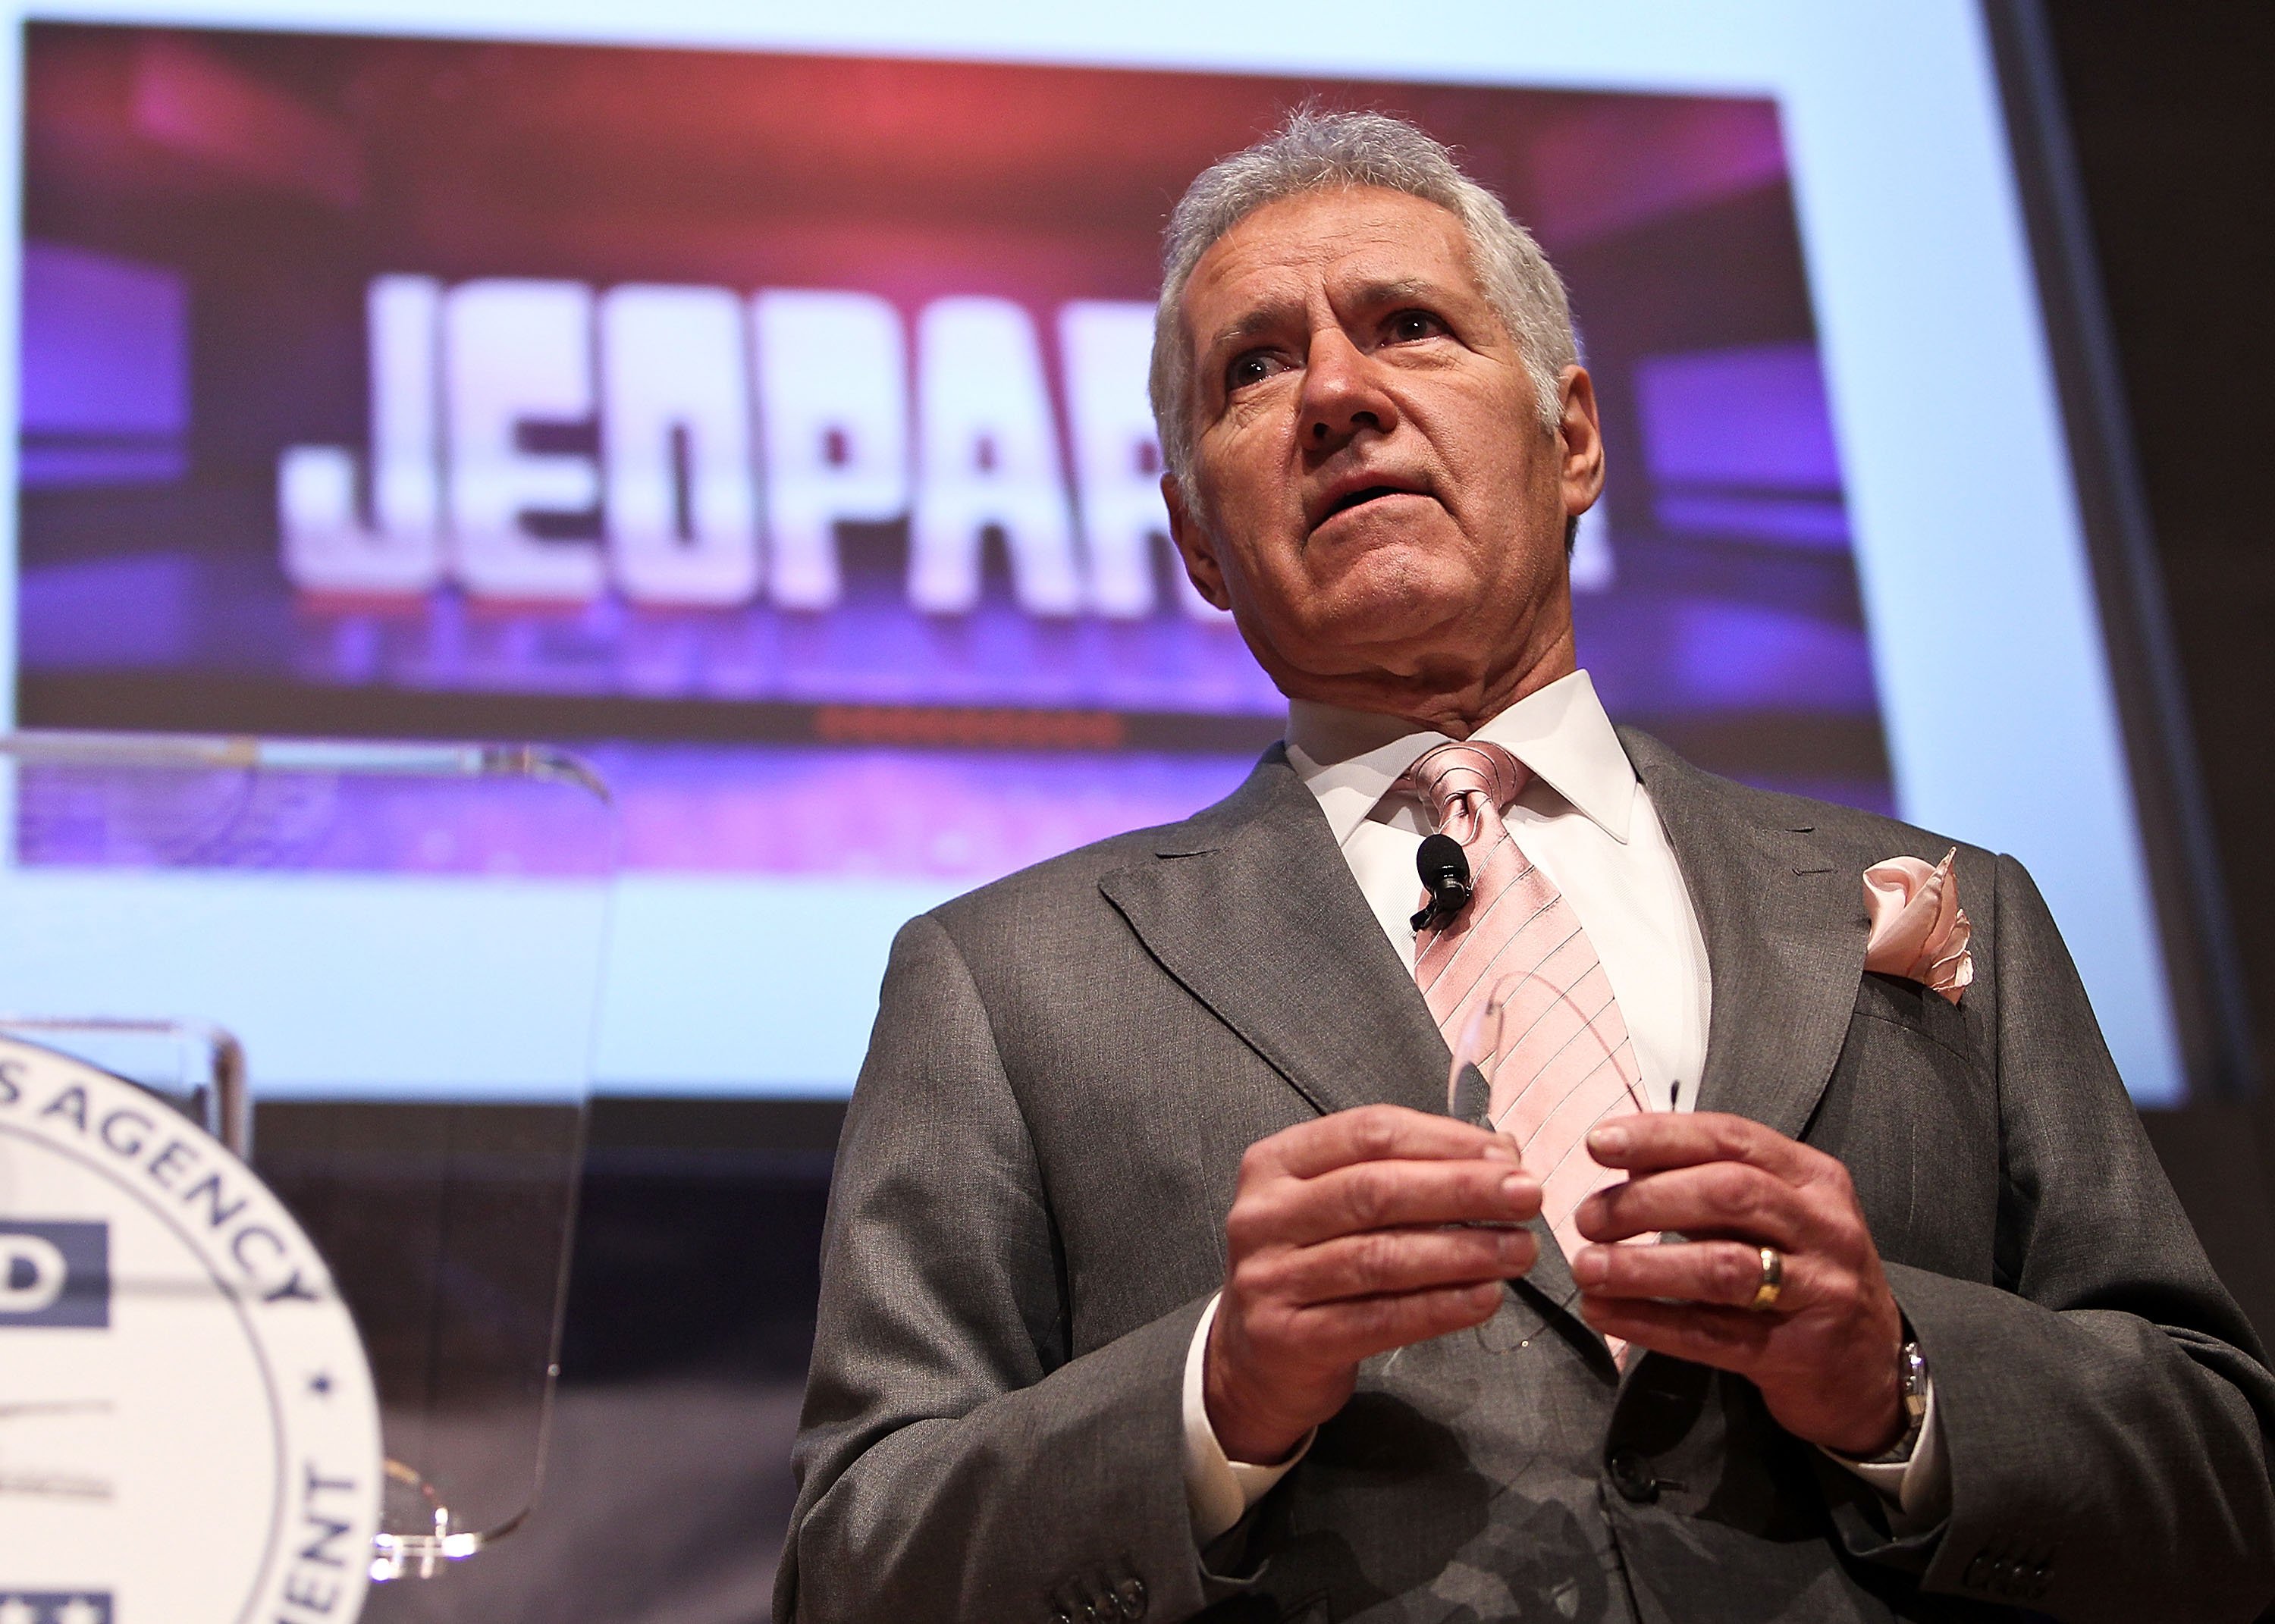 Alex Trebek hosts an episode of "Jeopardy!" in Washington, DC on November 18, 2011 | Photo: Getty Images